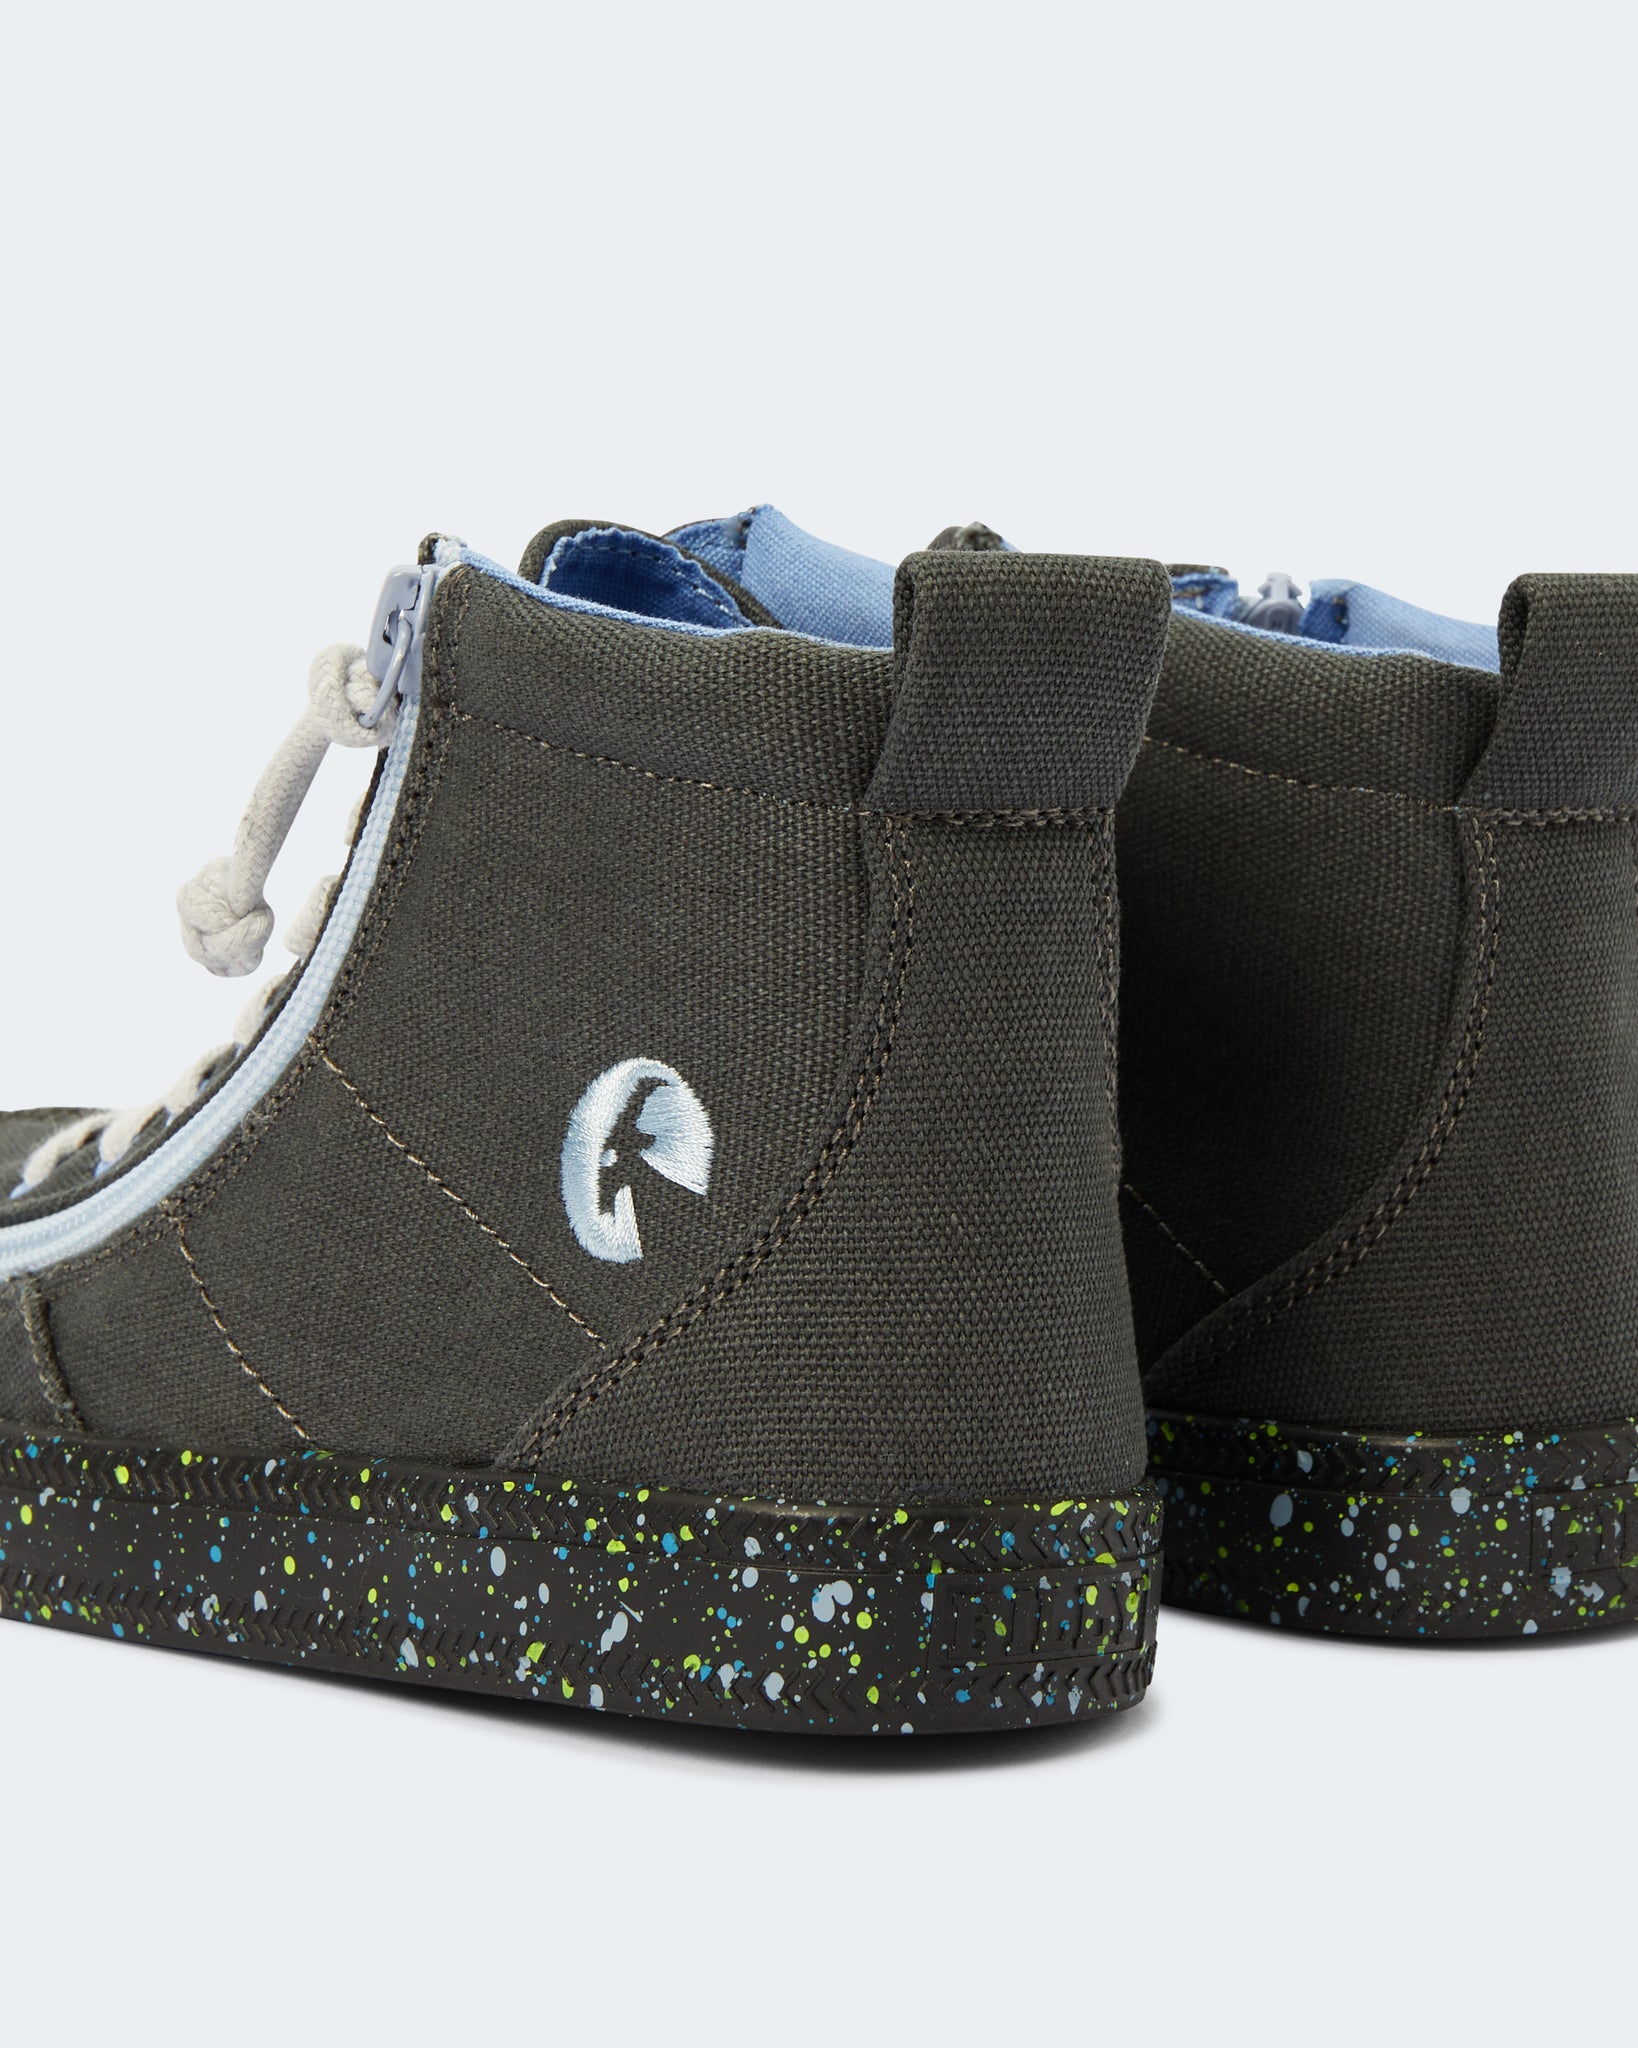 Classic High Top (Kids) - Charcoal/Blue Speckle